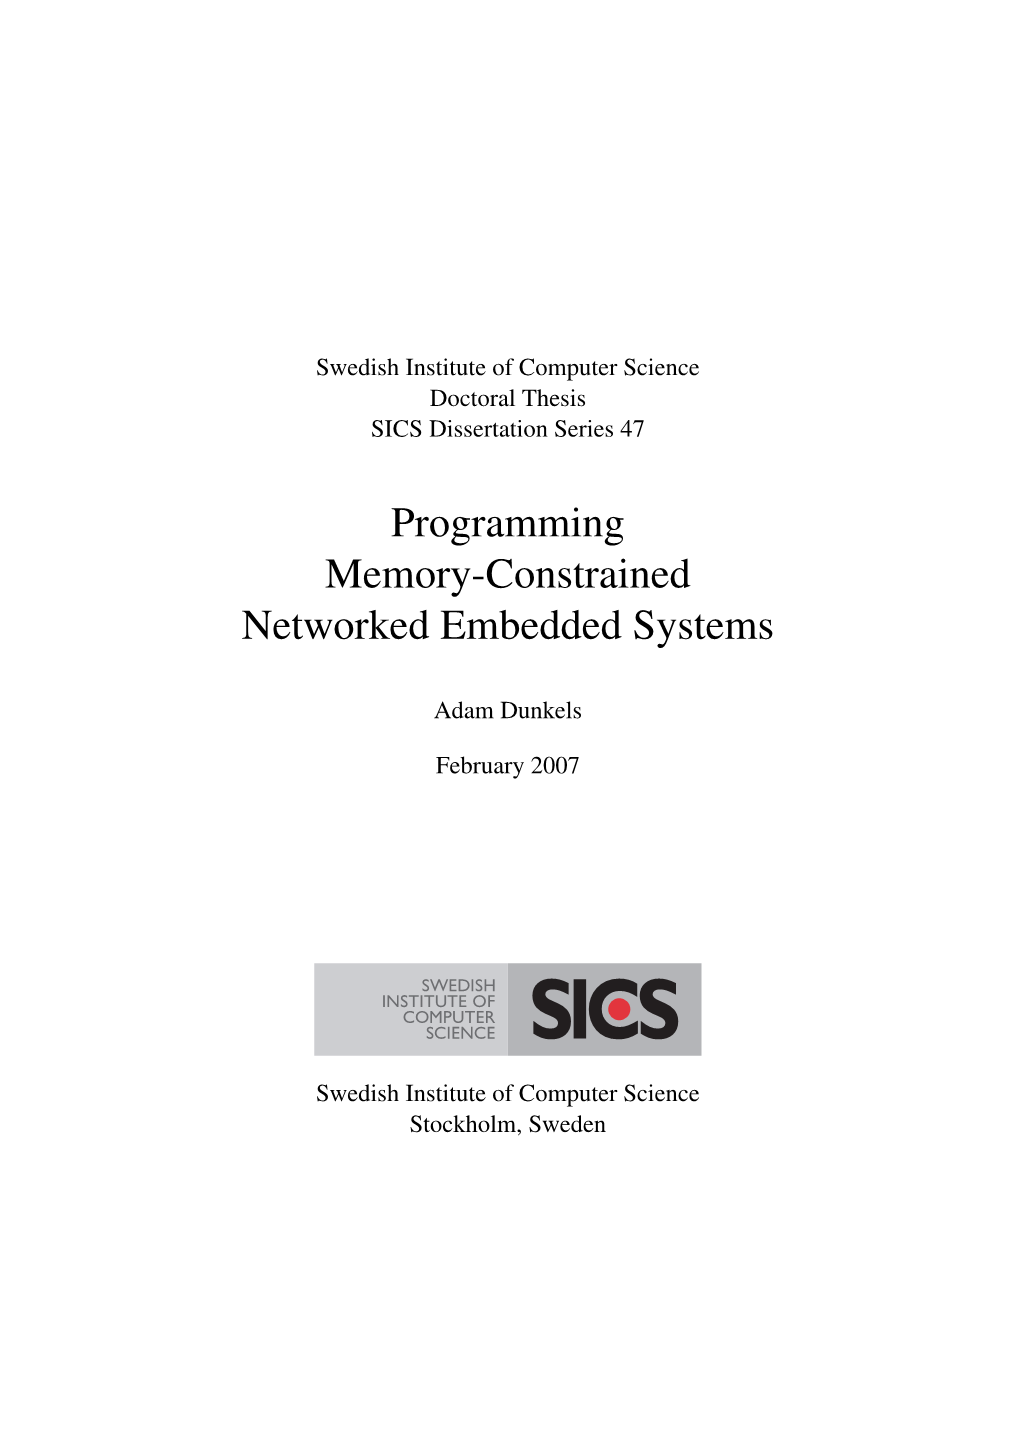 Programming Memory-Constrained Networked Embedded Systems